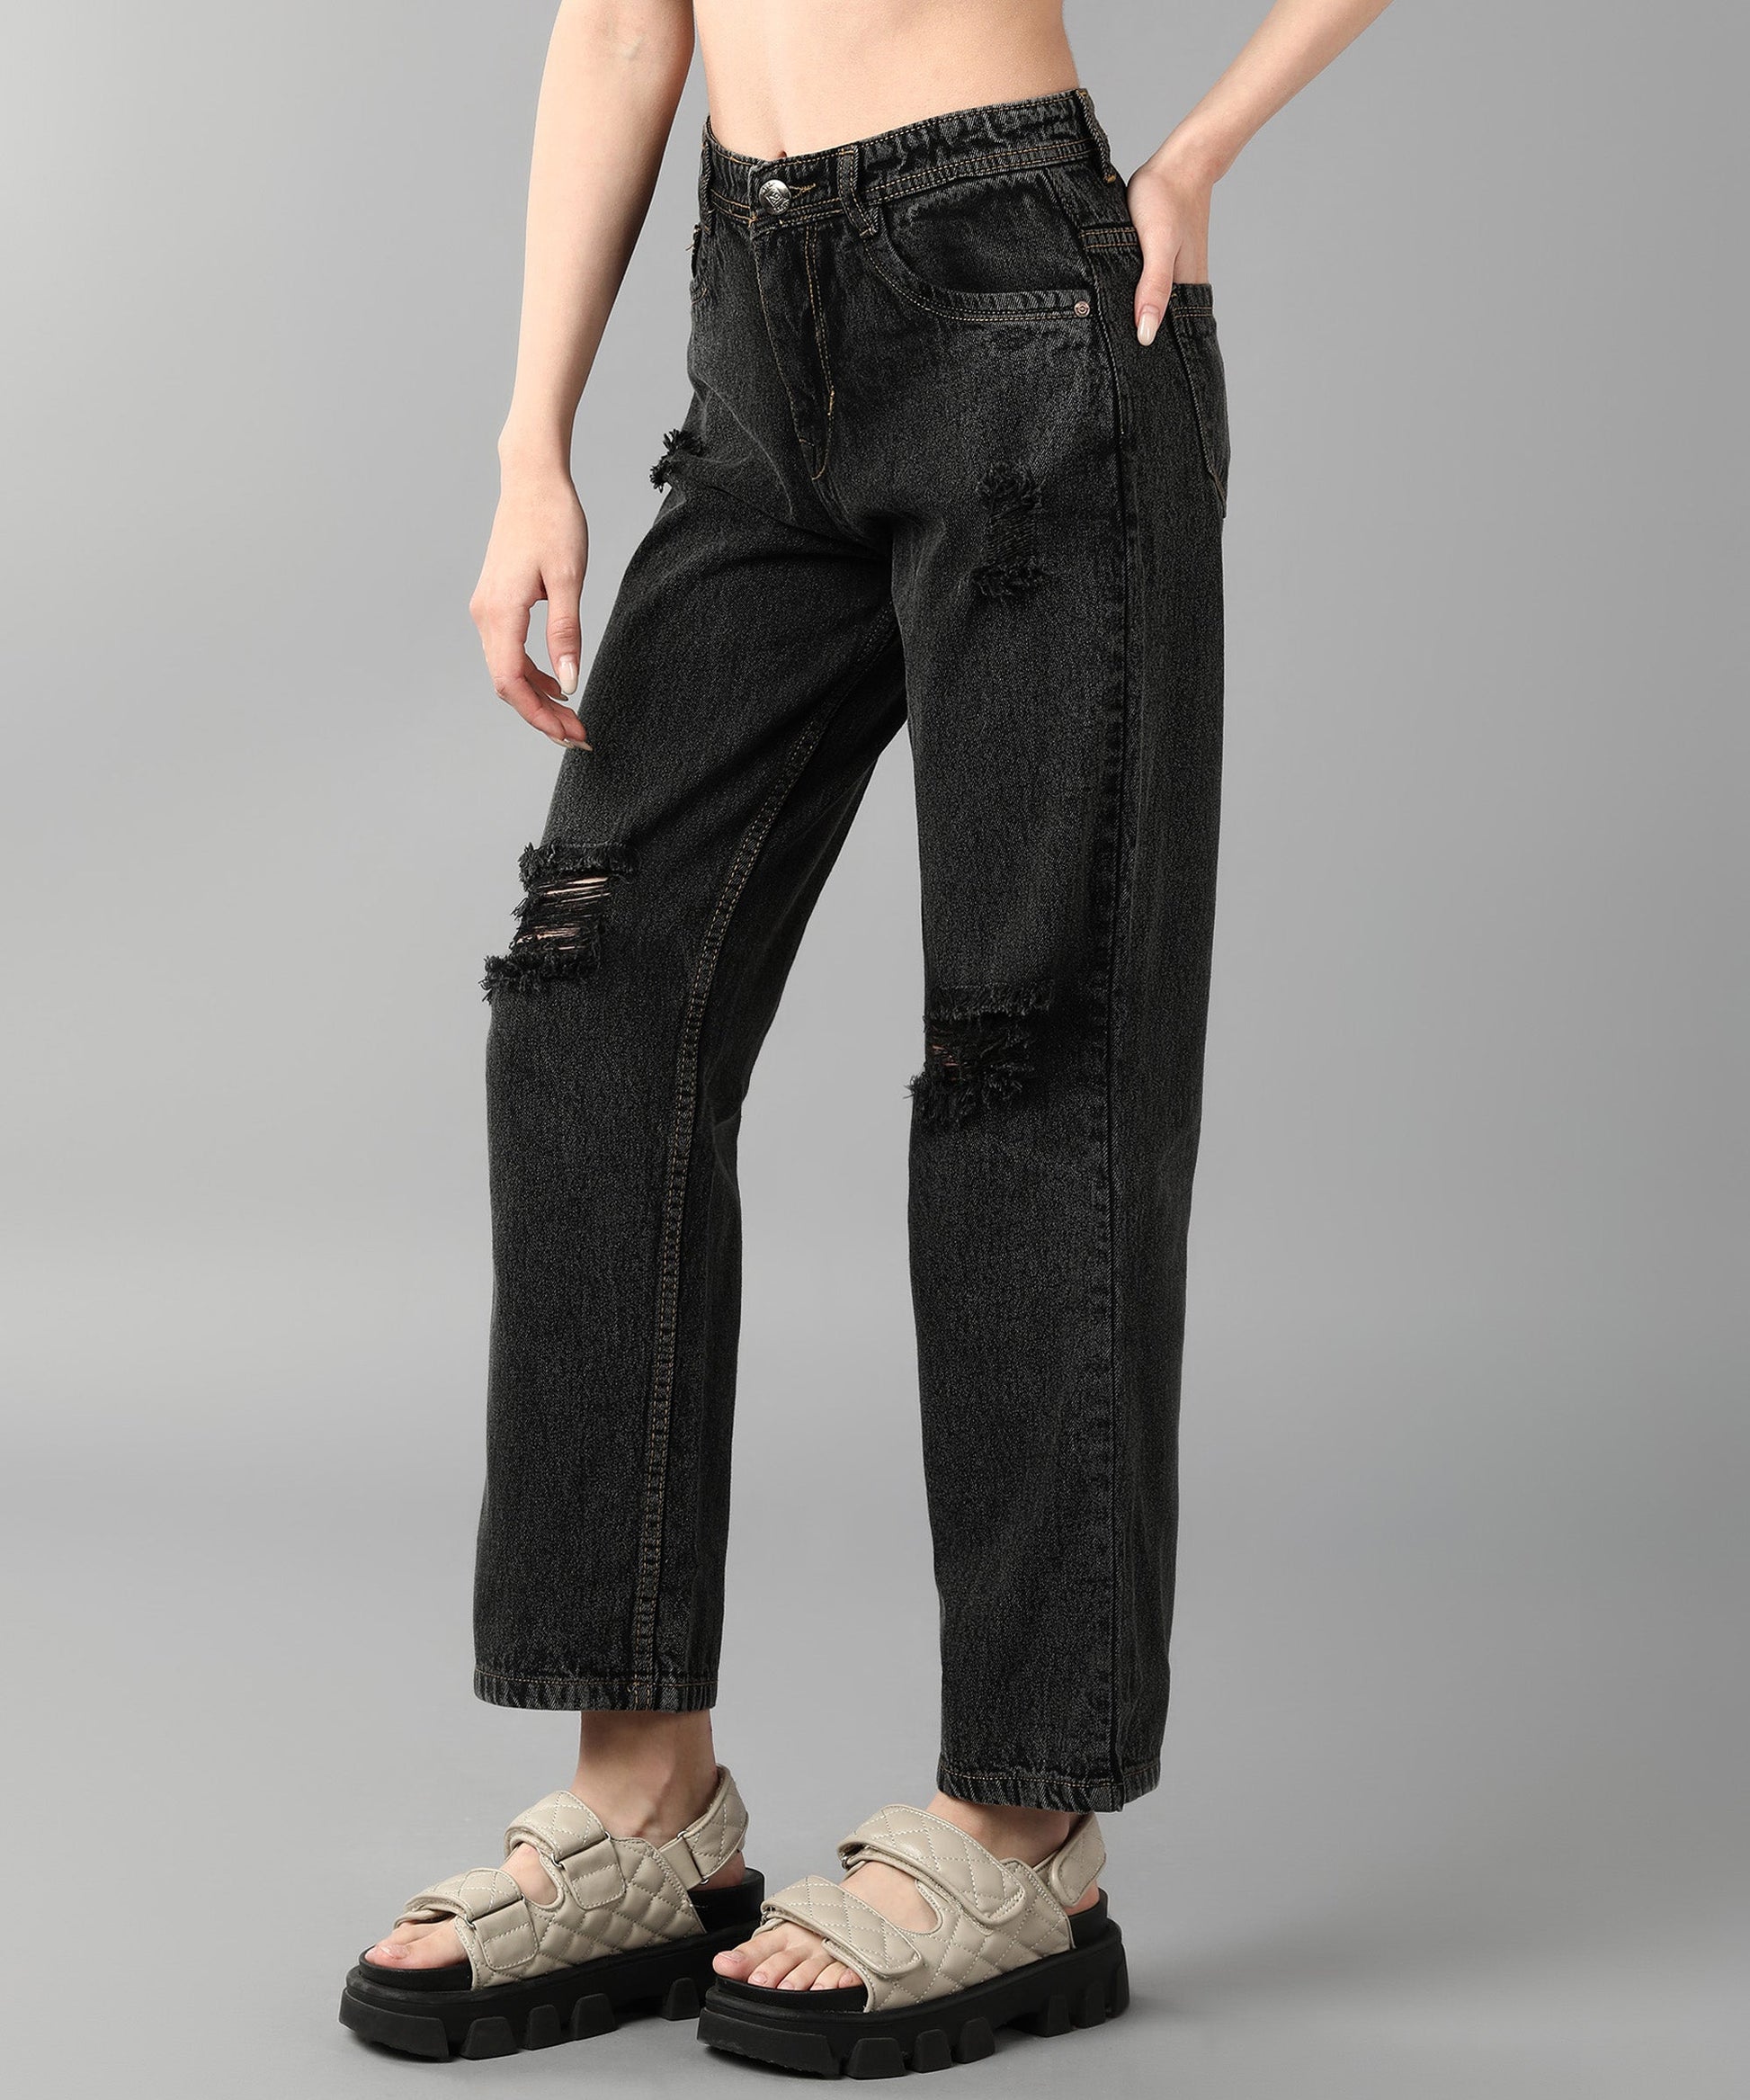 Relaxed Fit Distressed Grey Jeans - NiftyJeans